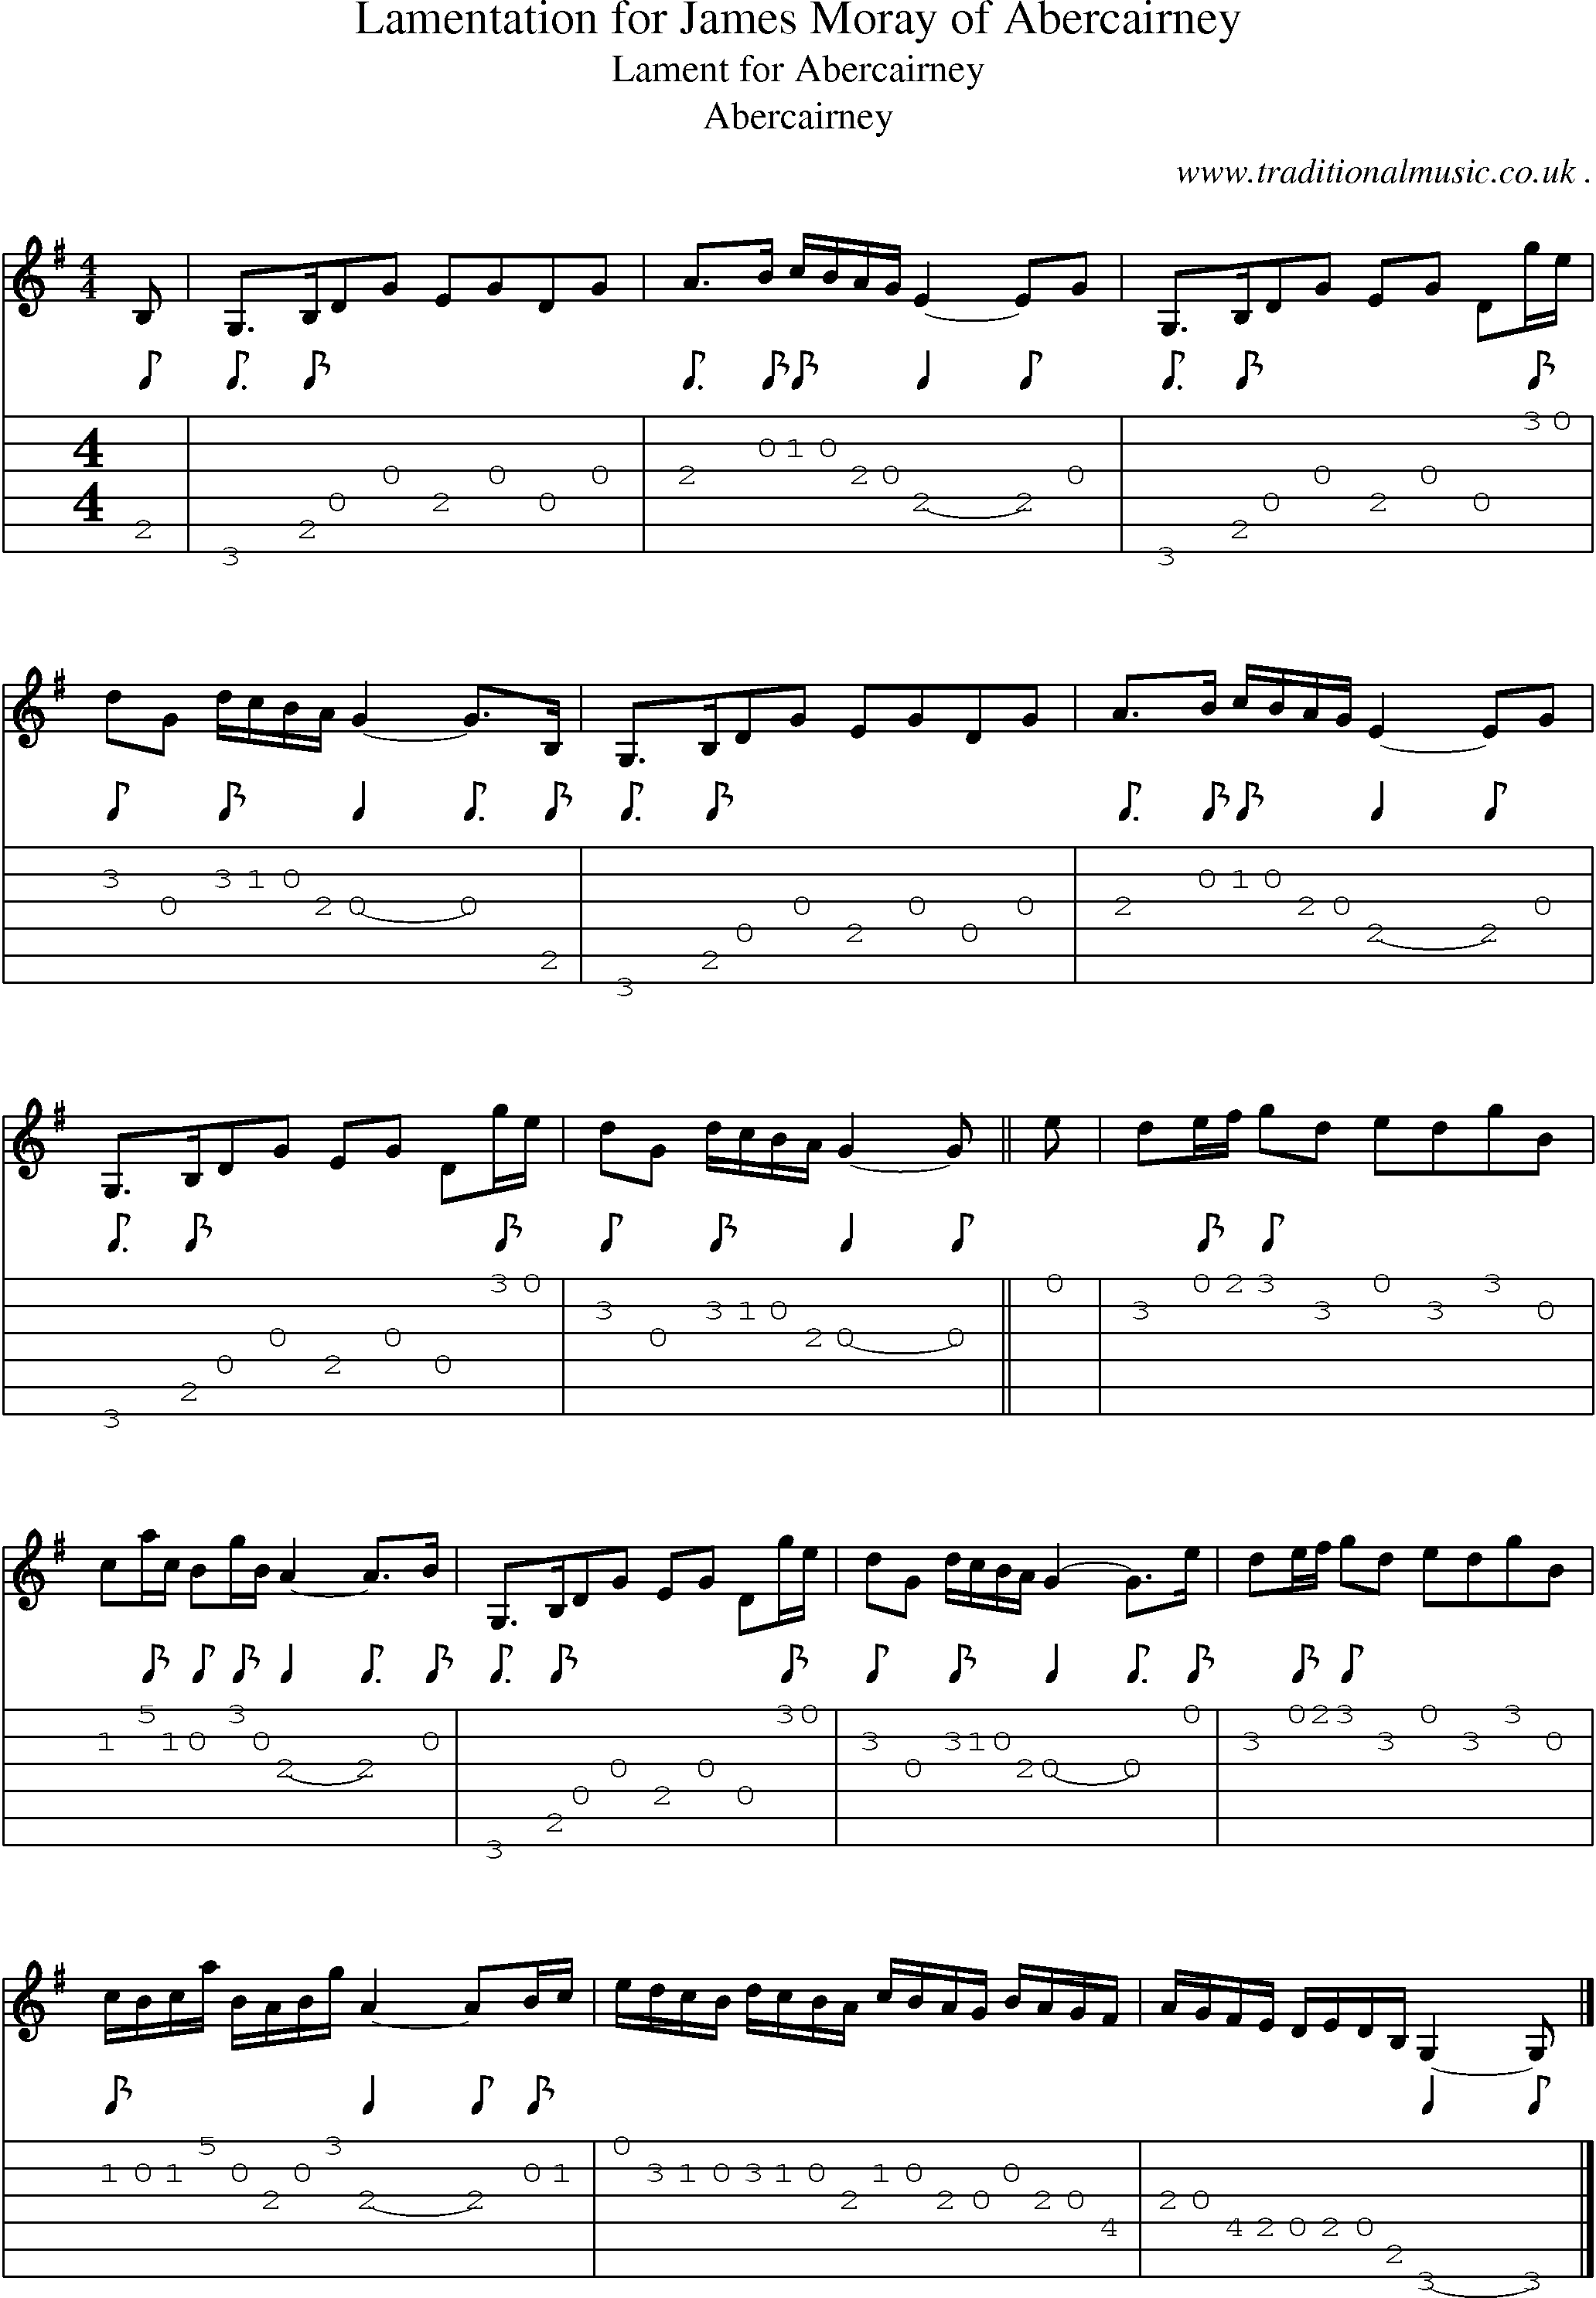 Sheet-music  score, Chords and Guitar Tabs for Lamentation For James Moray Of Abercairney